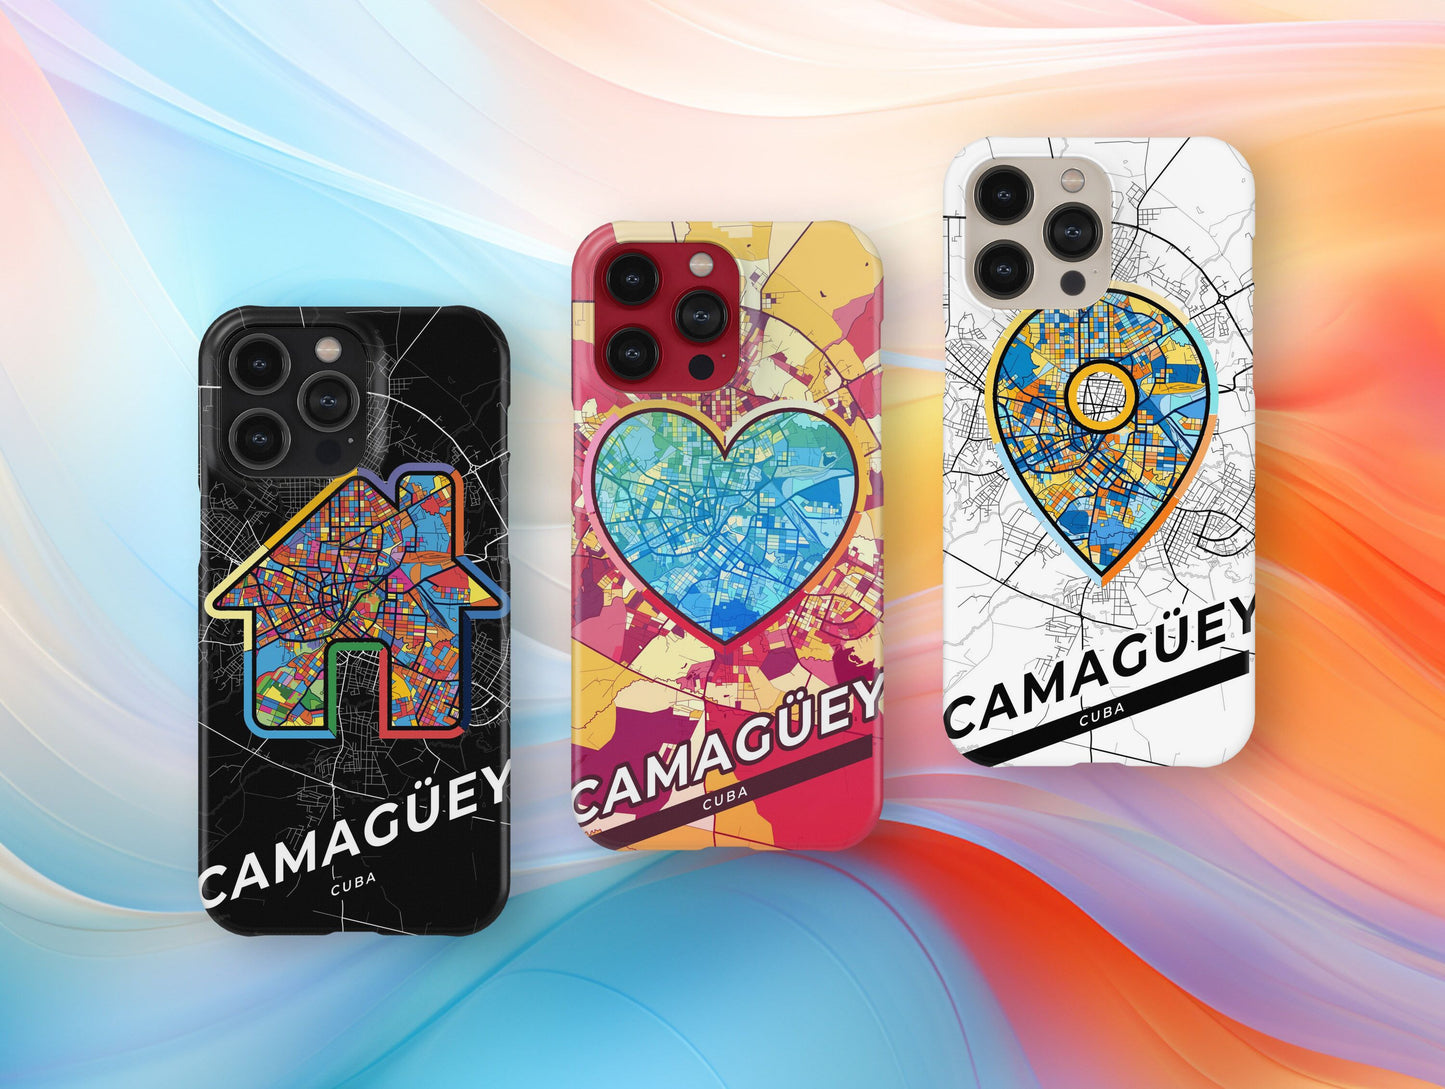 Camagüey Cuba slim phone case with colorful icon. Birthday, wedding or housewarming gift. Couple match cases.